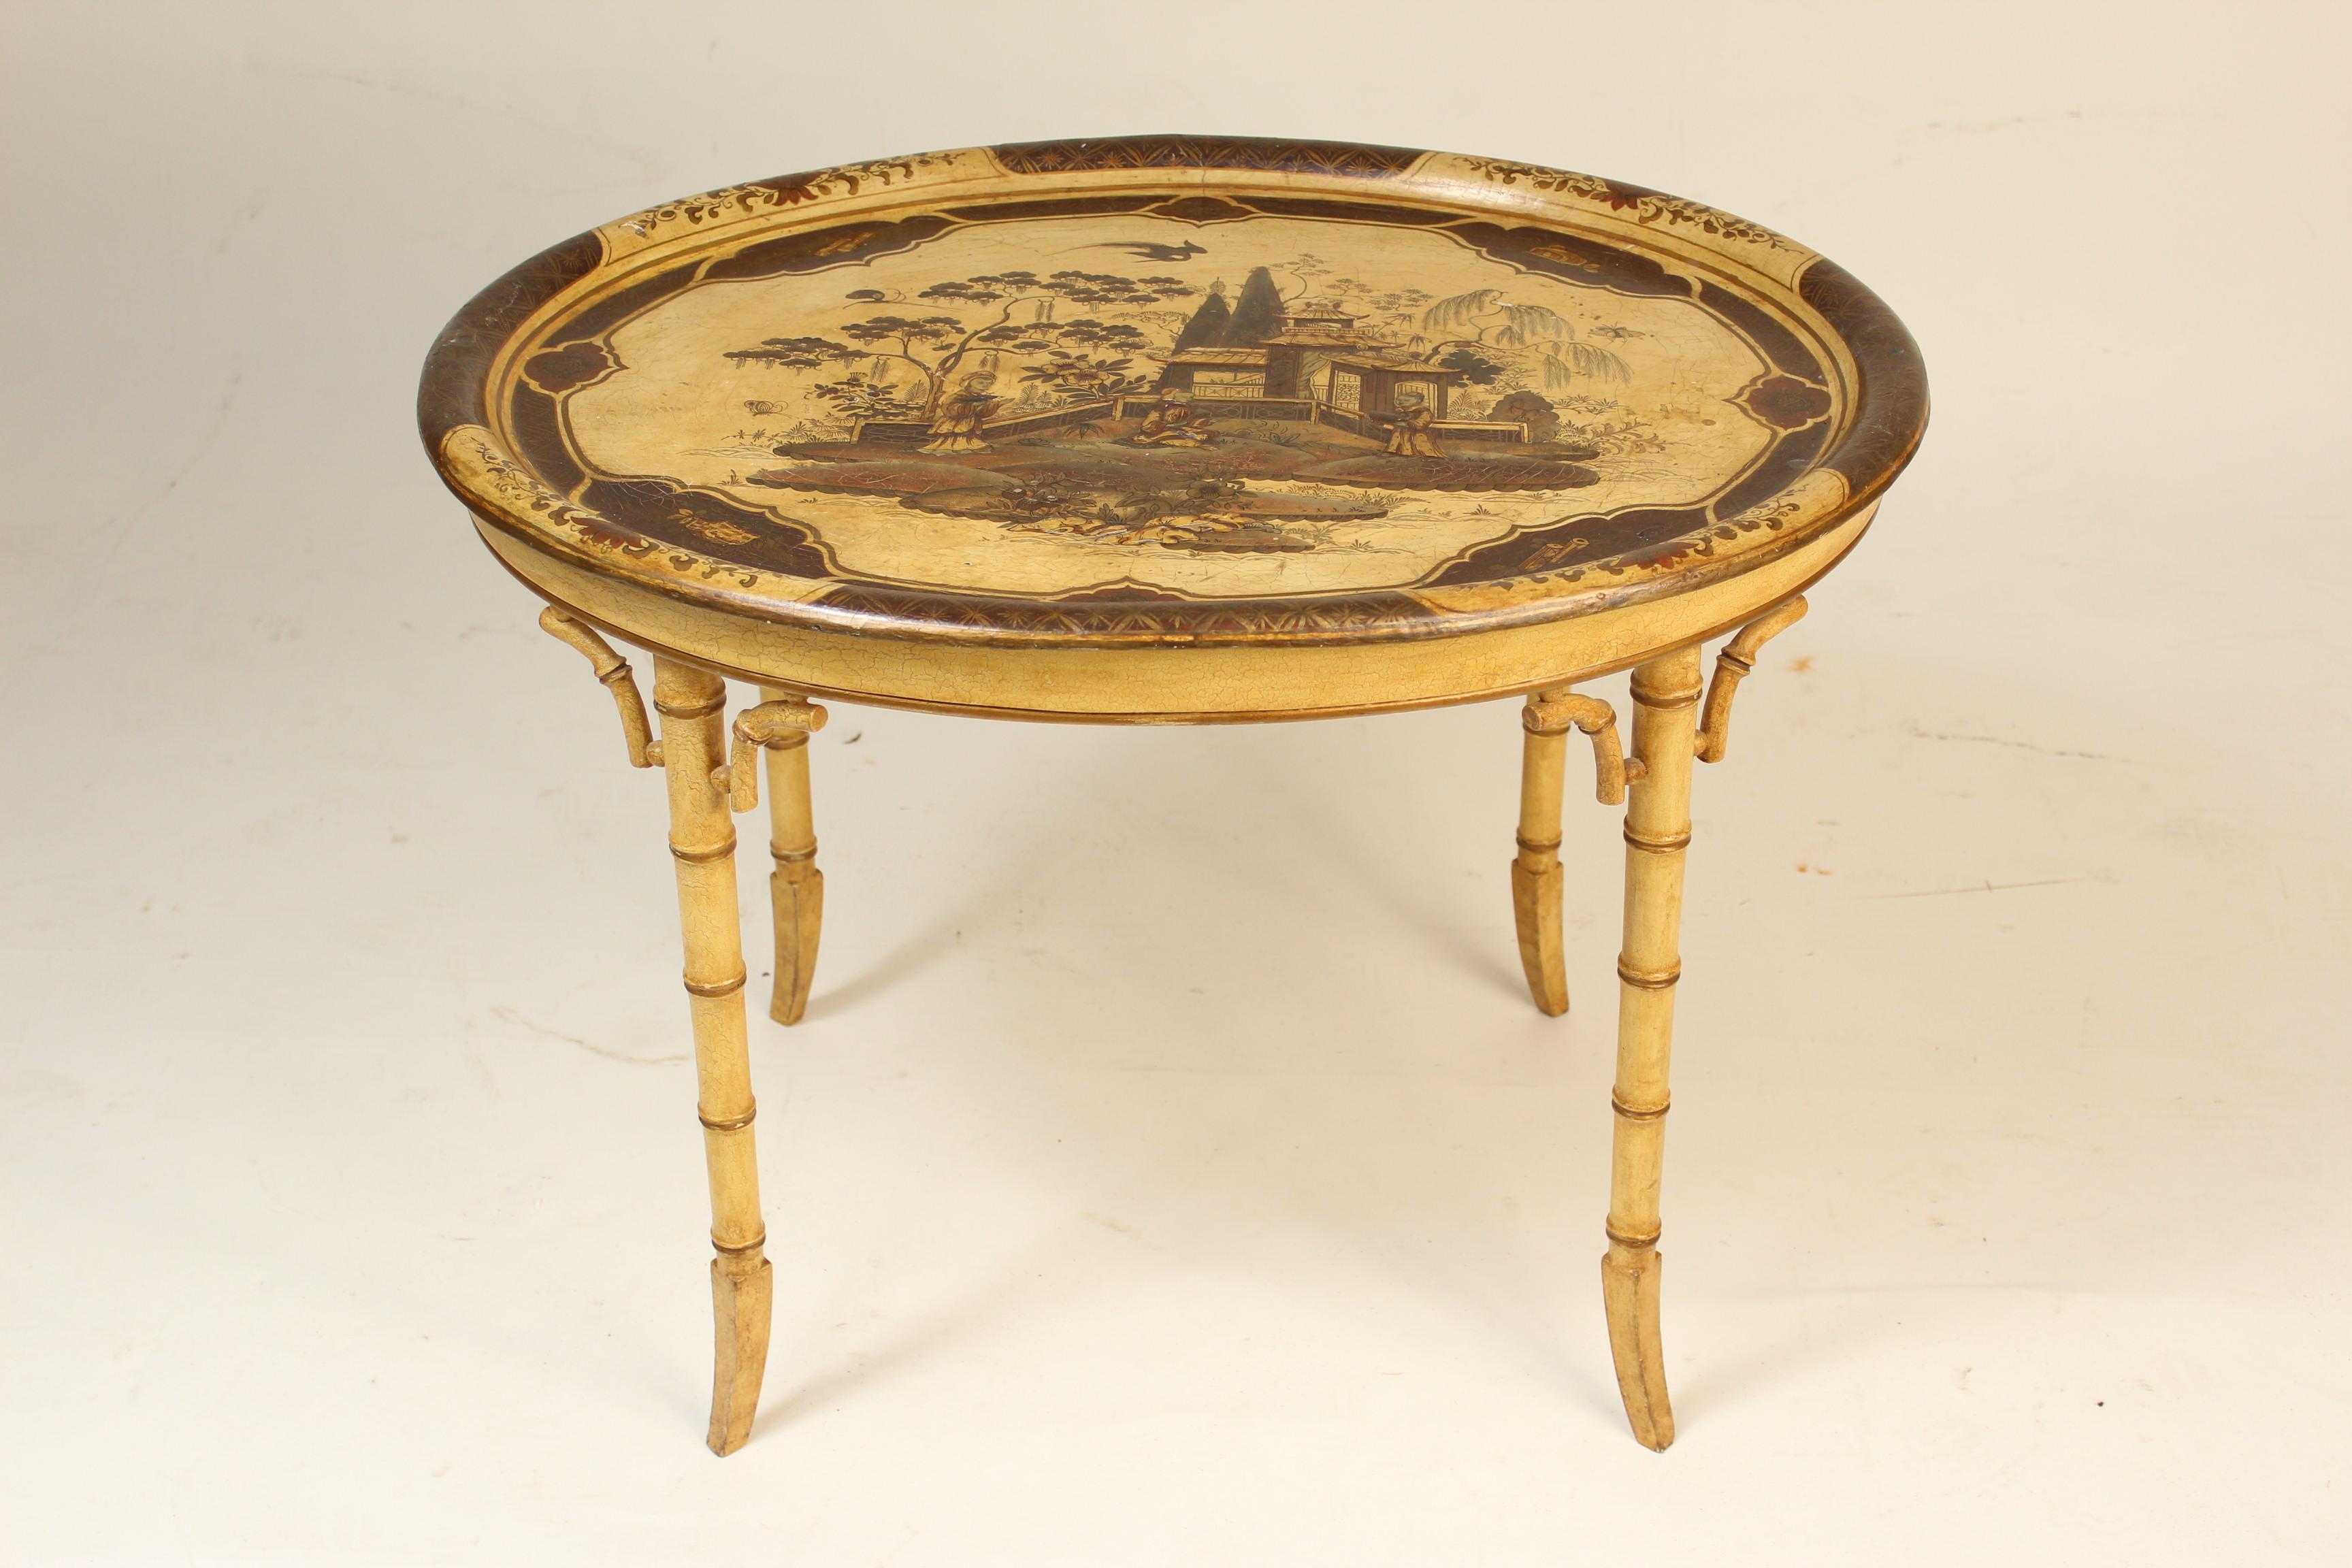 English Regency style cream colored chinoiserie decorated papier mâché tray, late 19th century, on a 20th century bamboo style turned base. The chinoiserie decorated tray has raised decorations and a crackled finish.